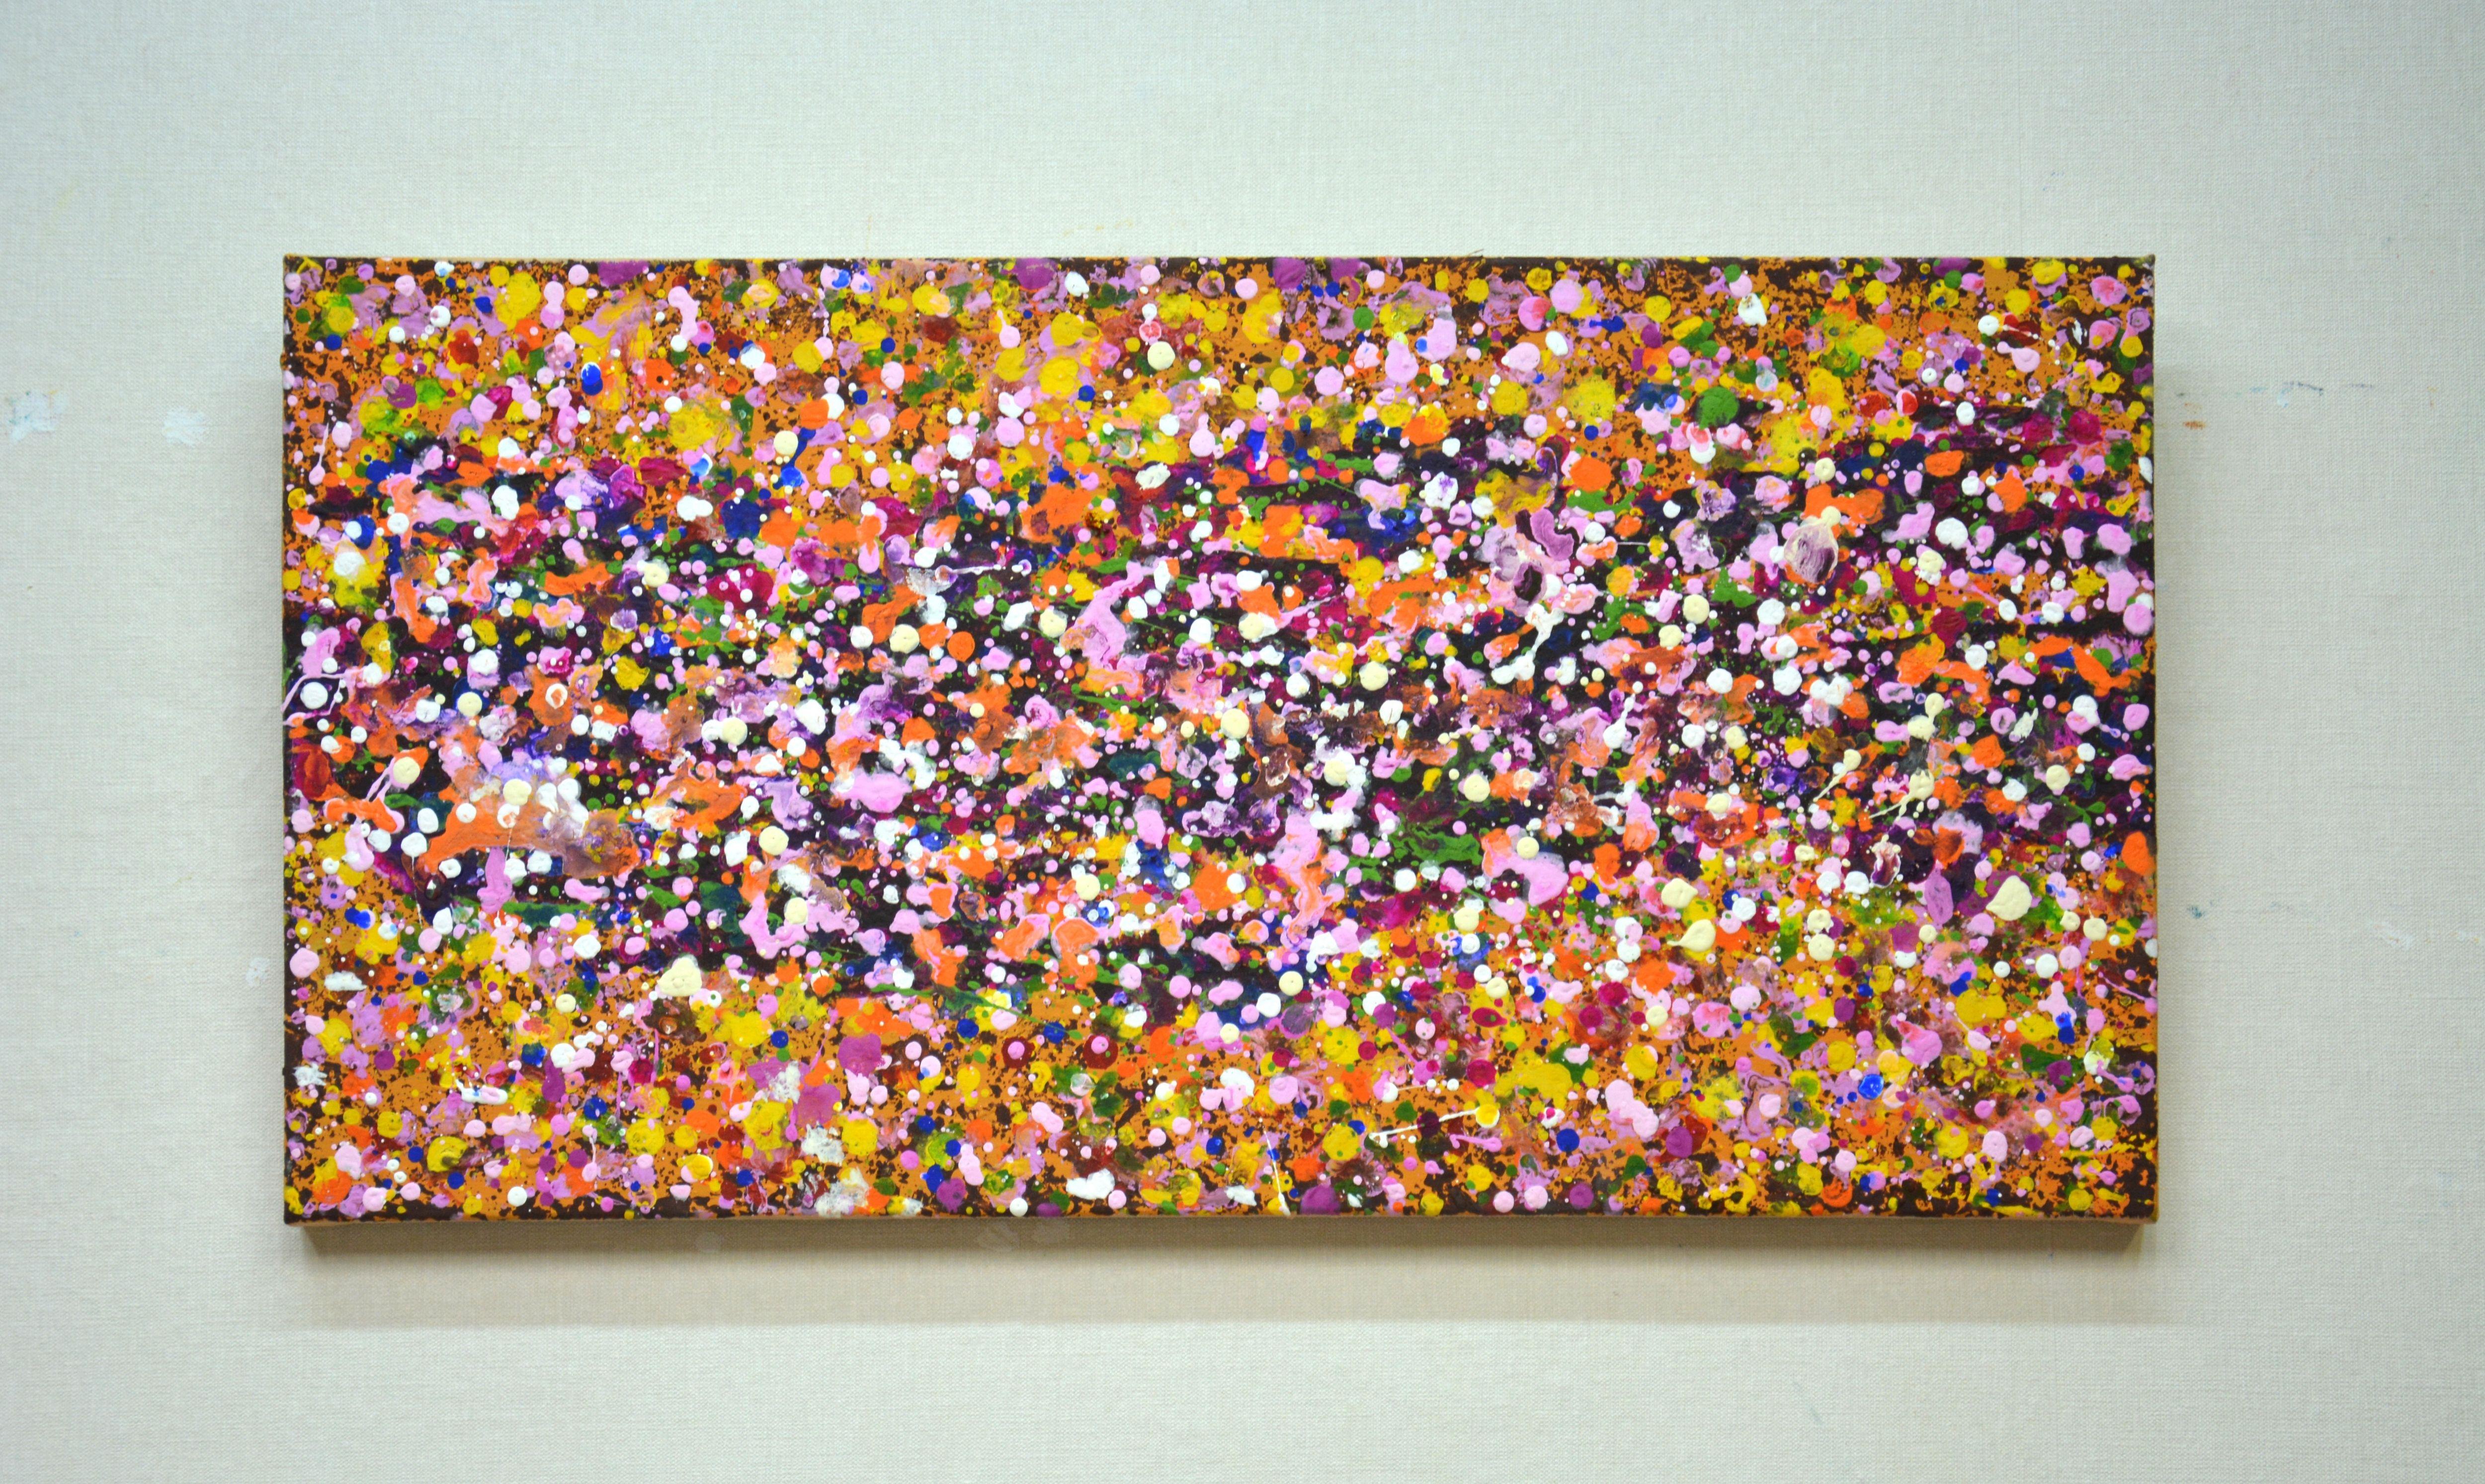 Beads. Expressive abstraction. A modern abstract painting created by drops and splashes of paint that sparkles and shimmers! Many colored drops of orange, dark pink, yellow, white on a warm background.  The picture is of good spatial quality, filled